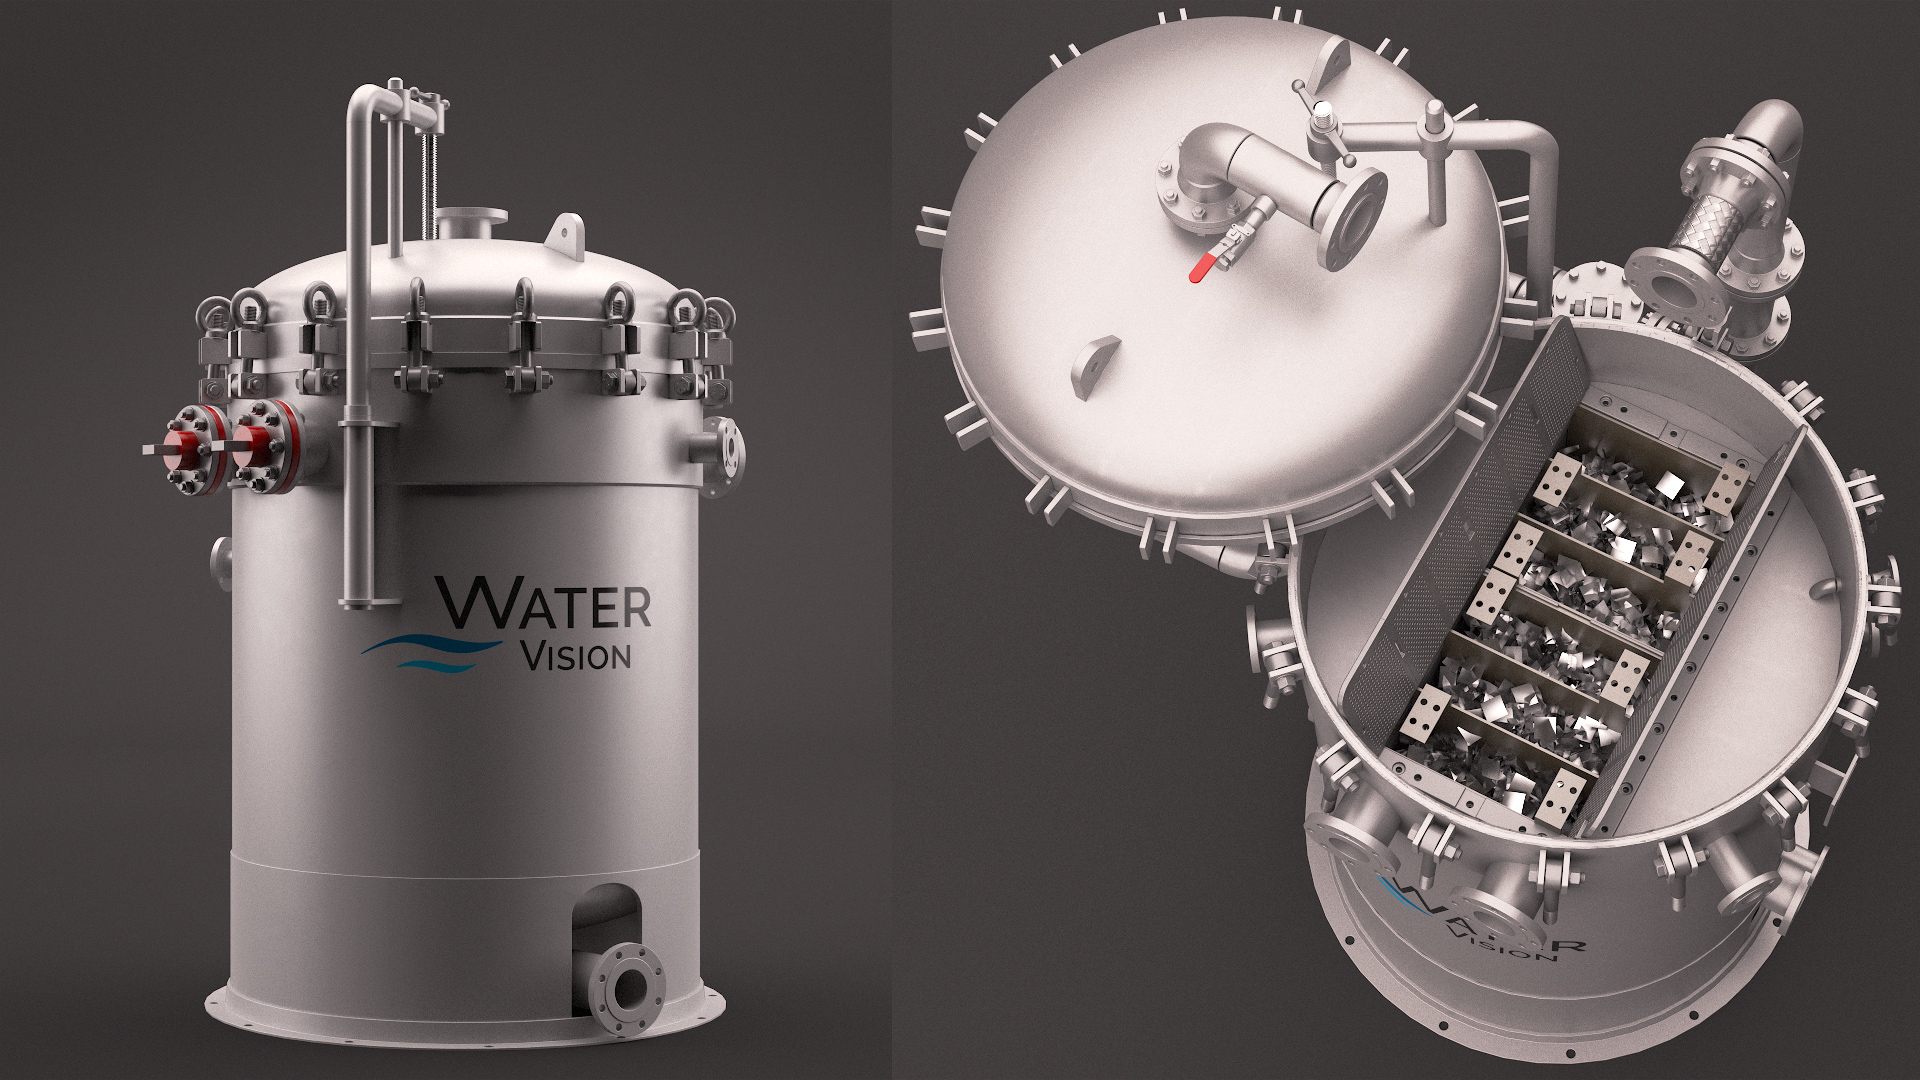 The new vessel for Thincell is shown. (Source: Water Vision Inc.)